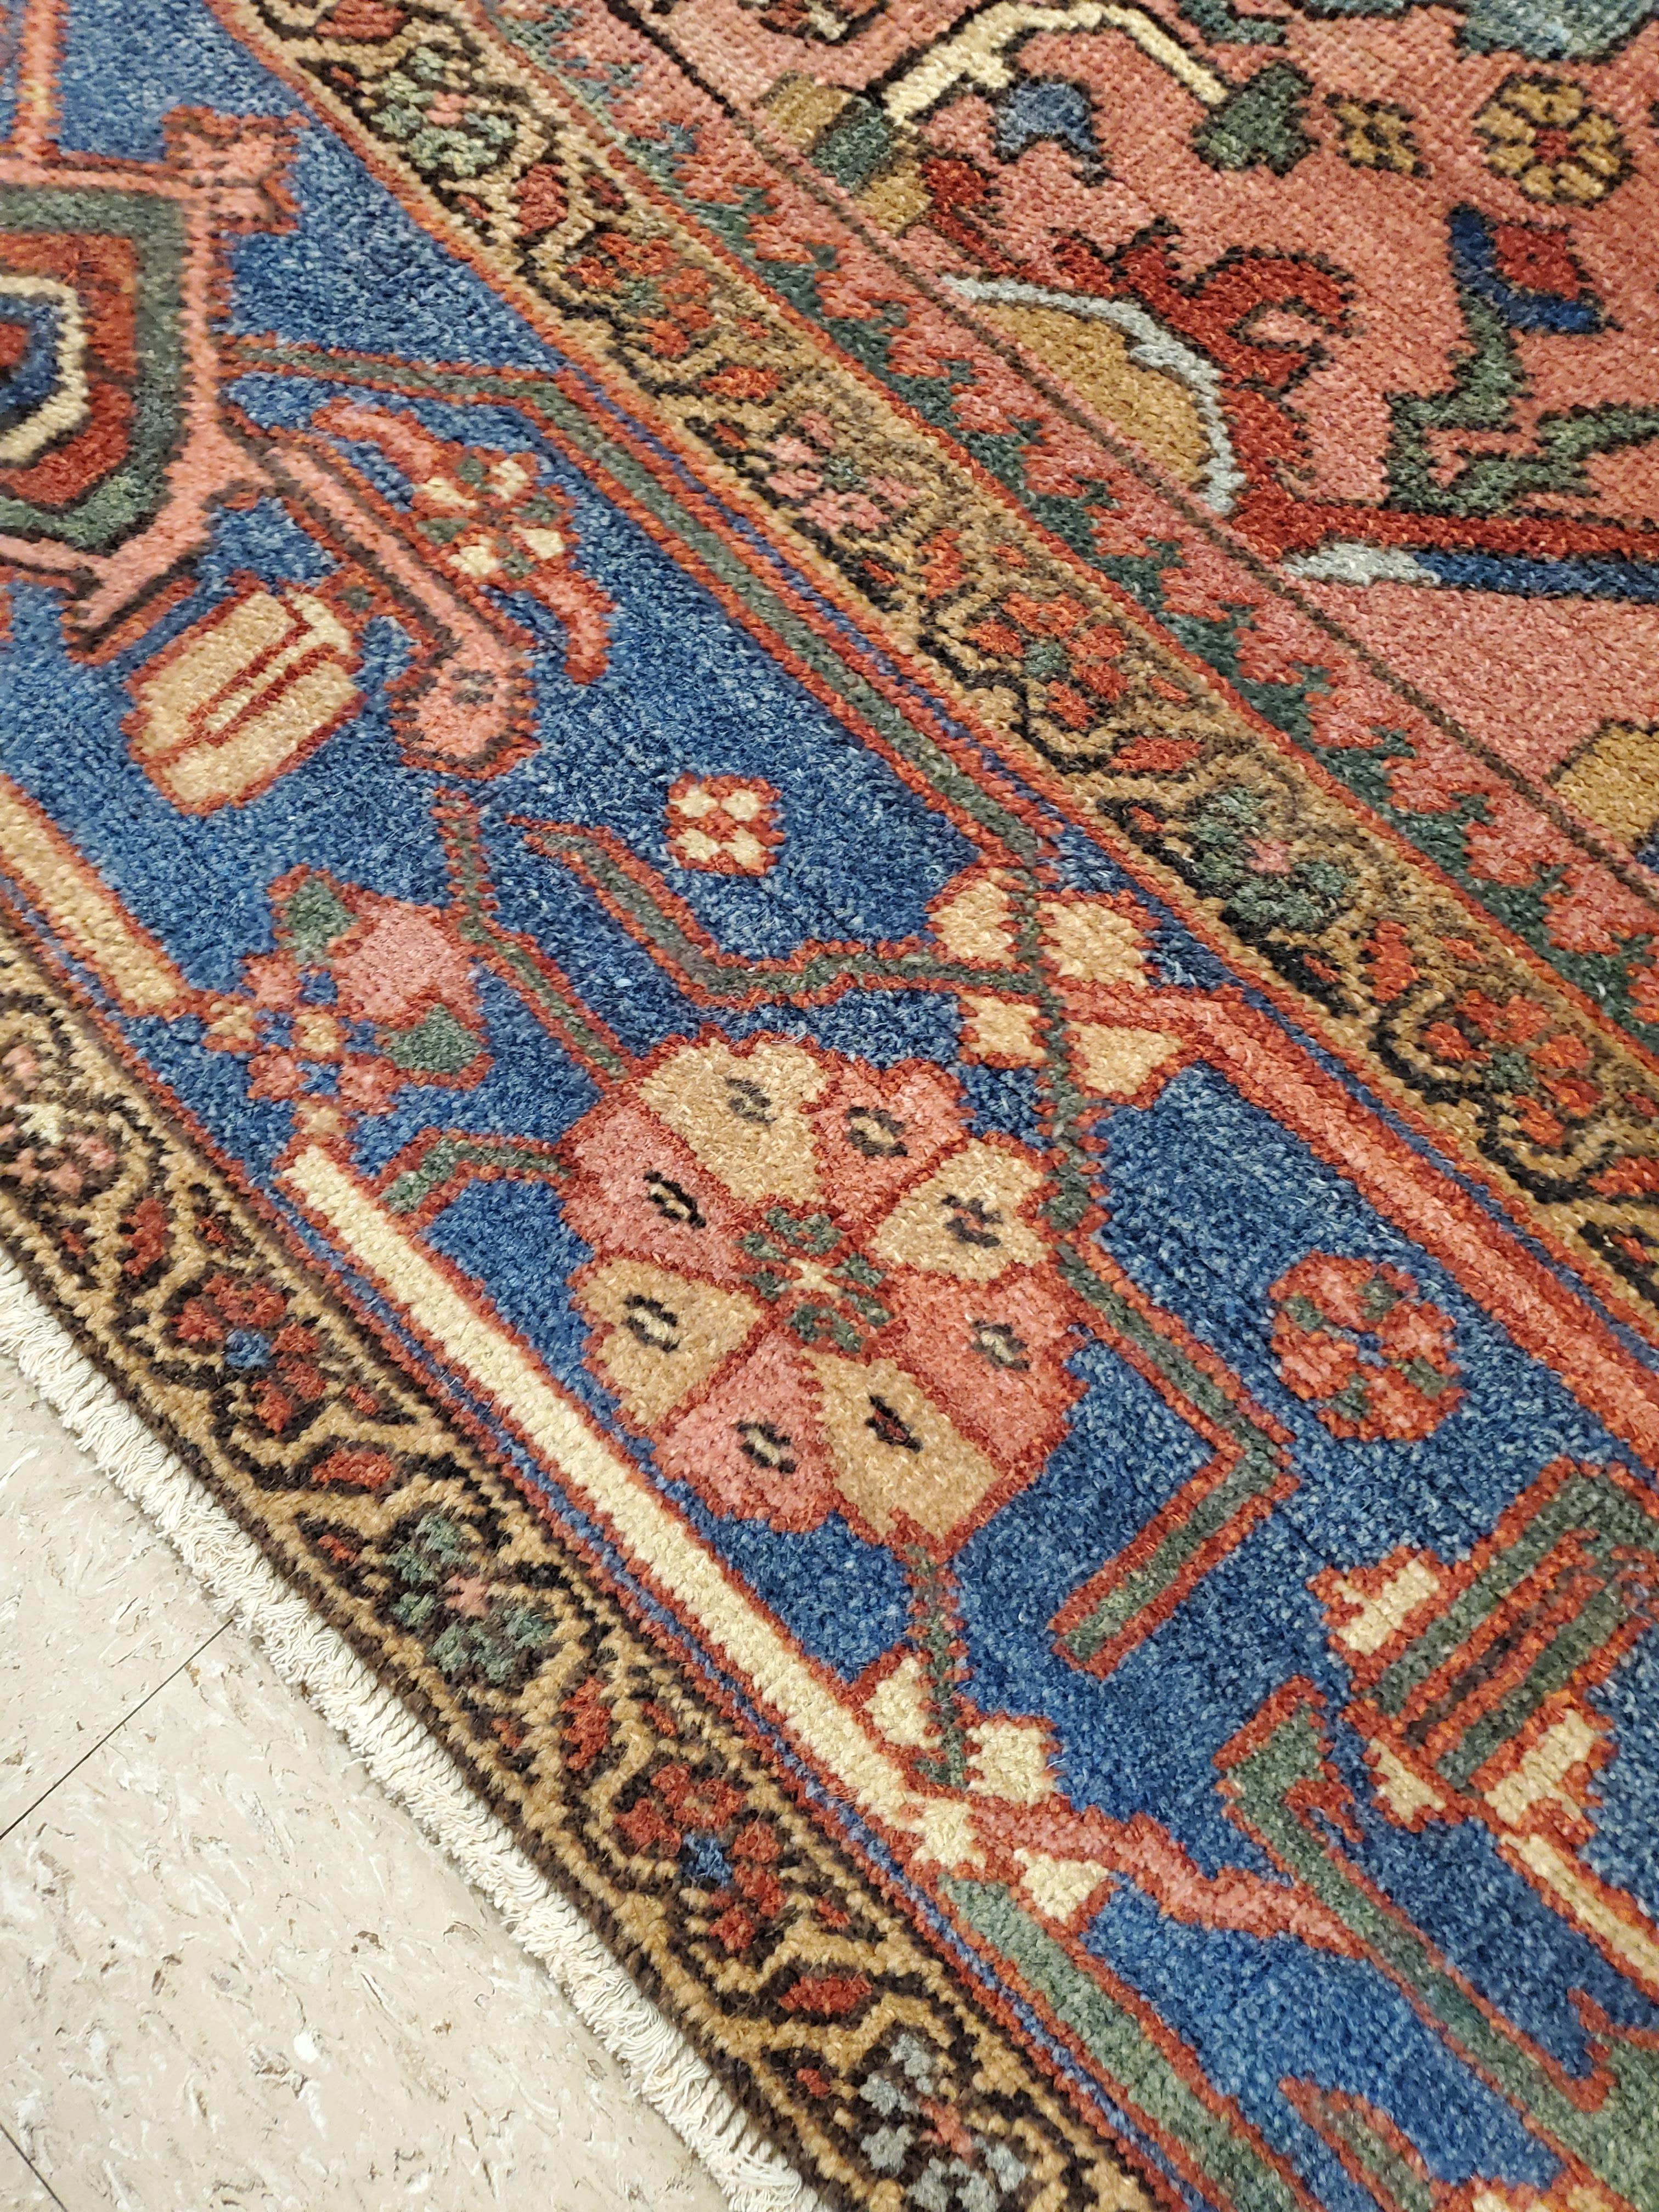 Antique Persian Heriz Carpet Handmade Wool Oriental Rug, Rust, Navy, Light Blue In Good Condition For Sale In Port Washington, NY